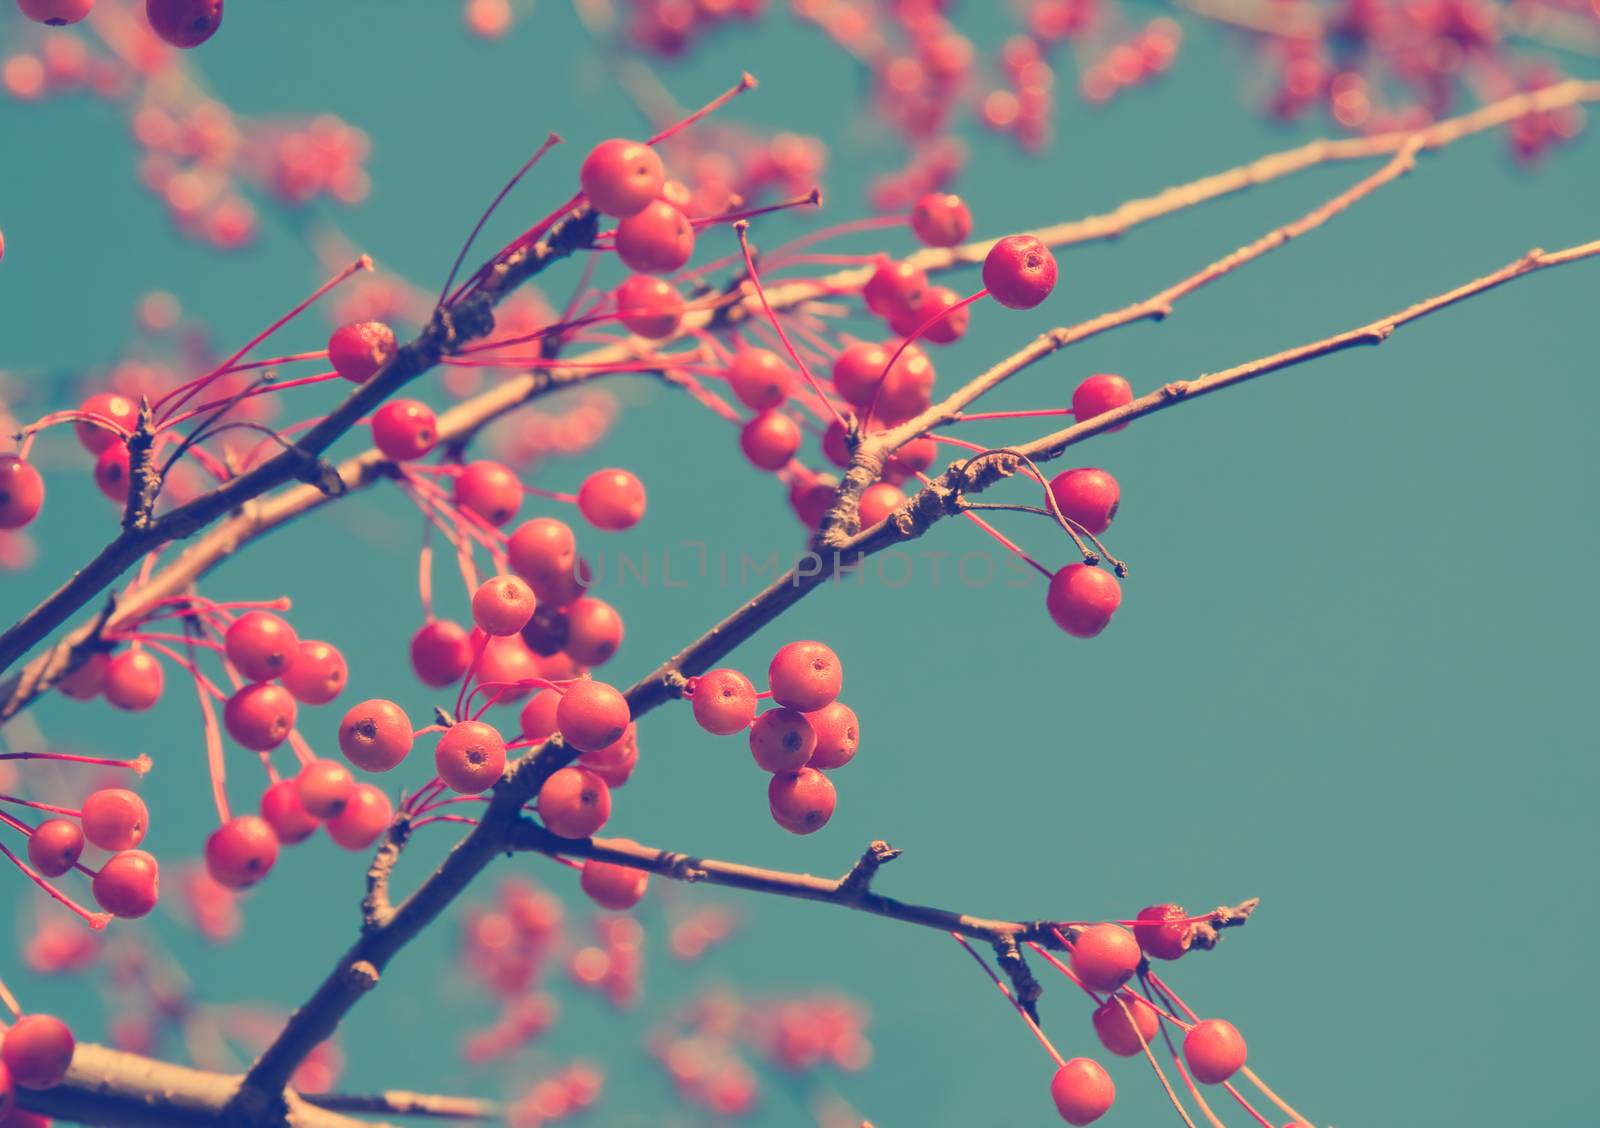 red berries by anelina